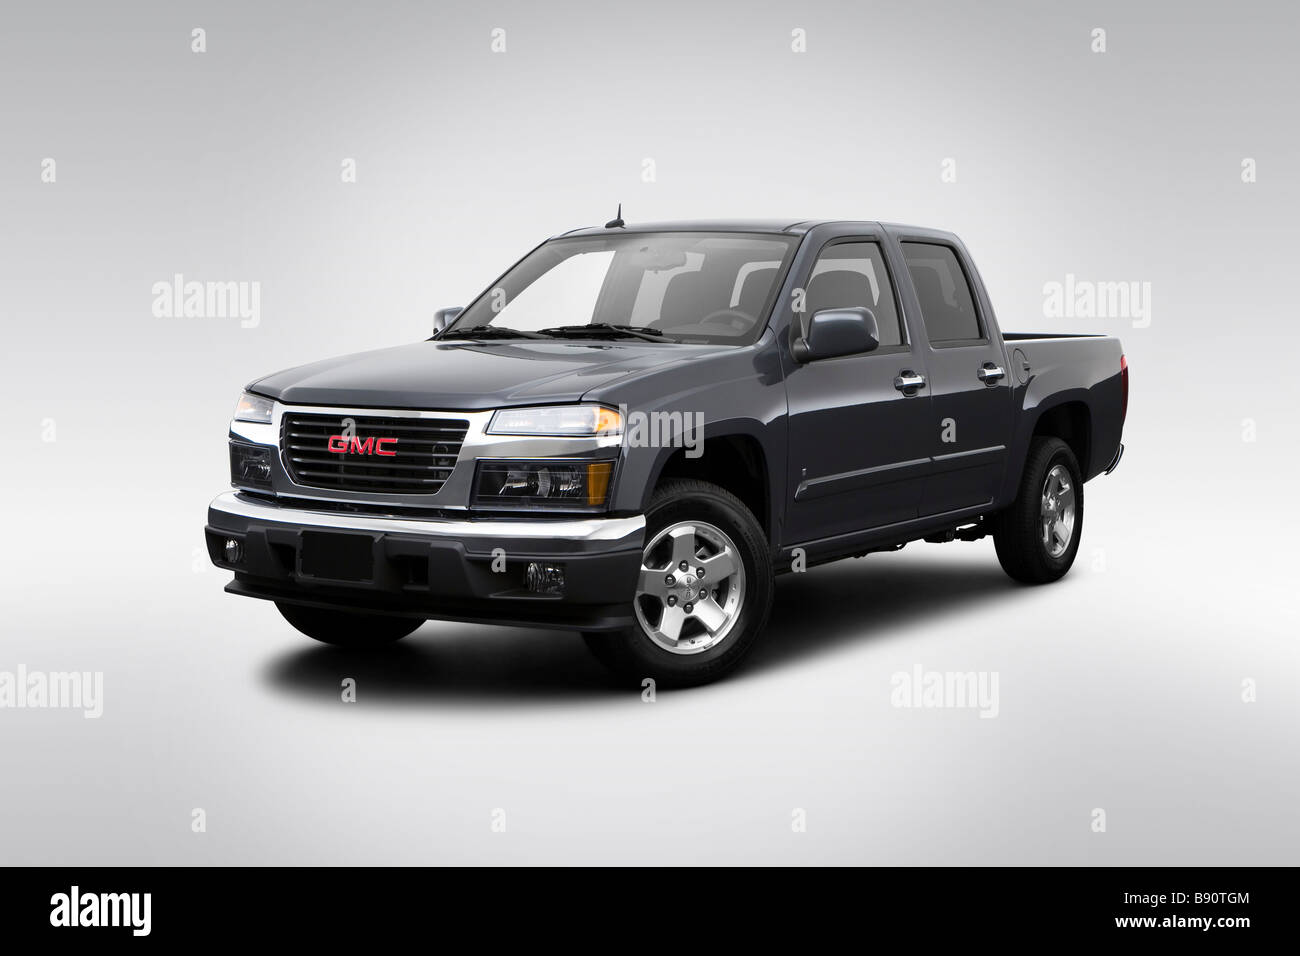 2009 GMC Canyon SLE in Gray - Front angle view Stock Photo - Alamy